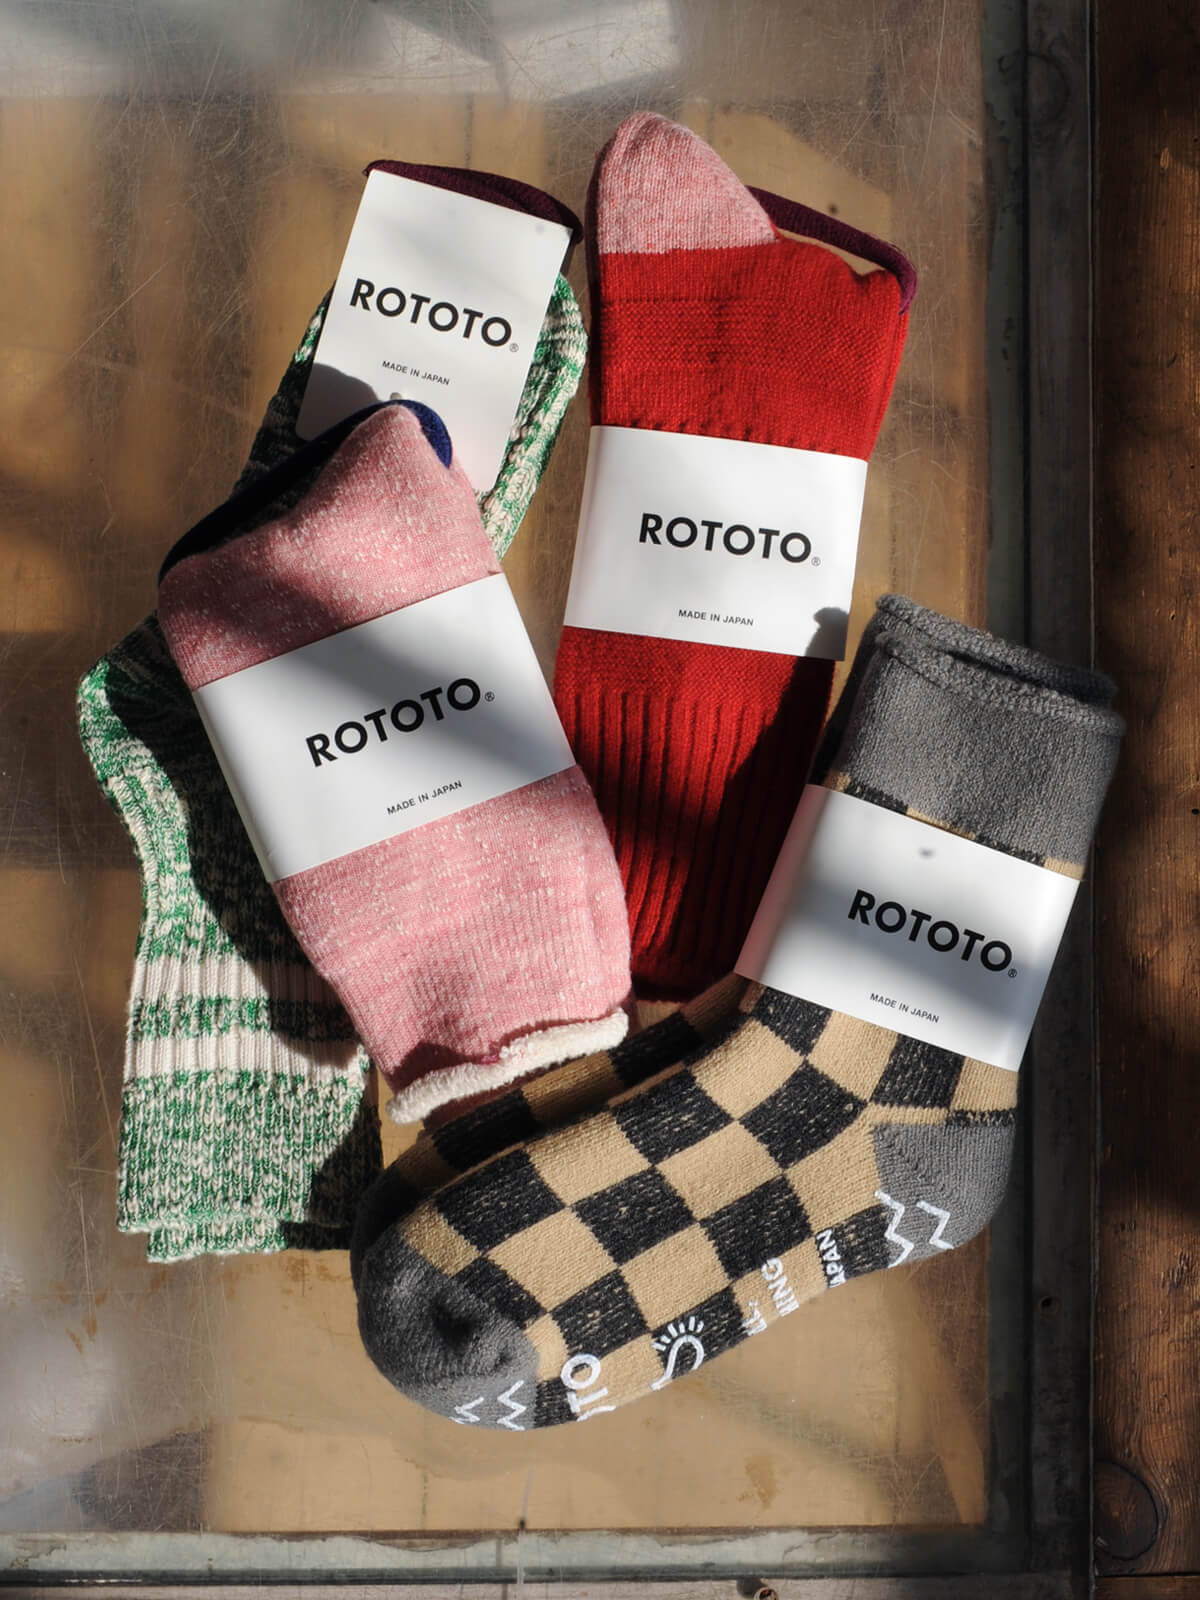 A styled image of RoToTo socks.